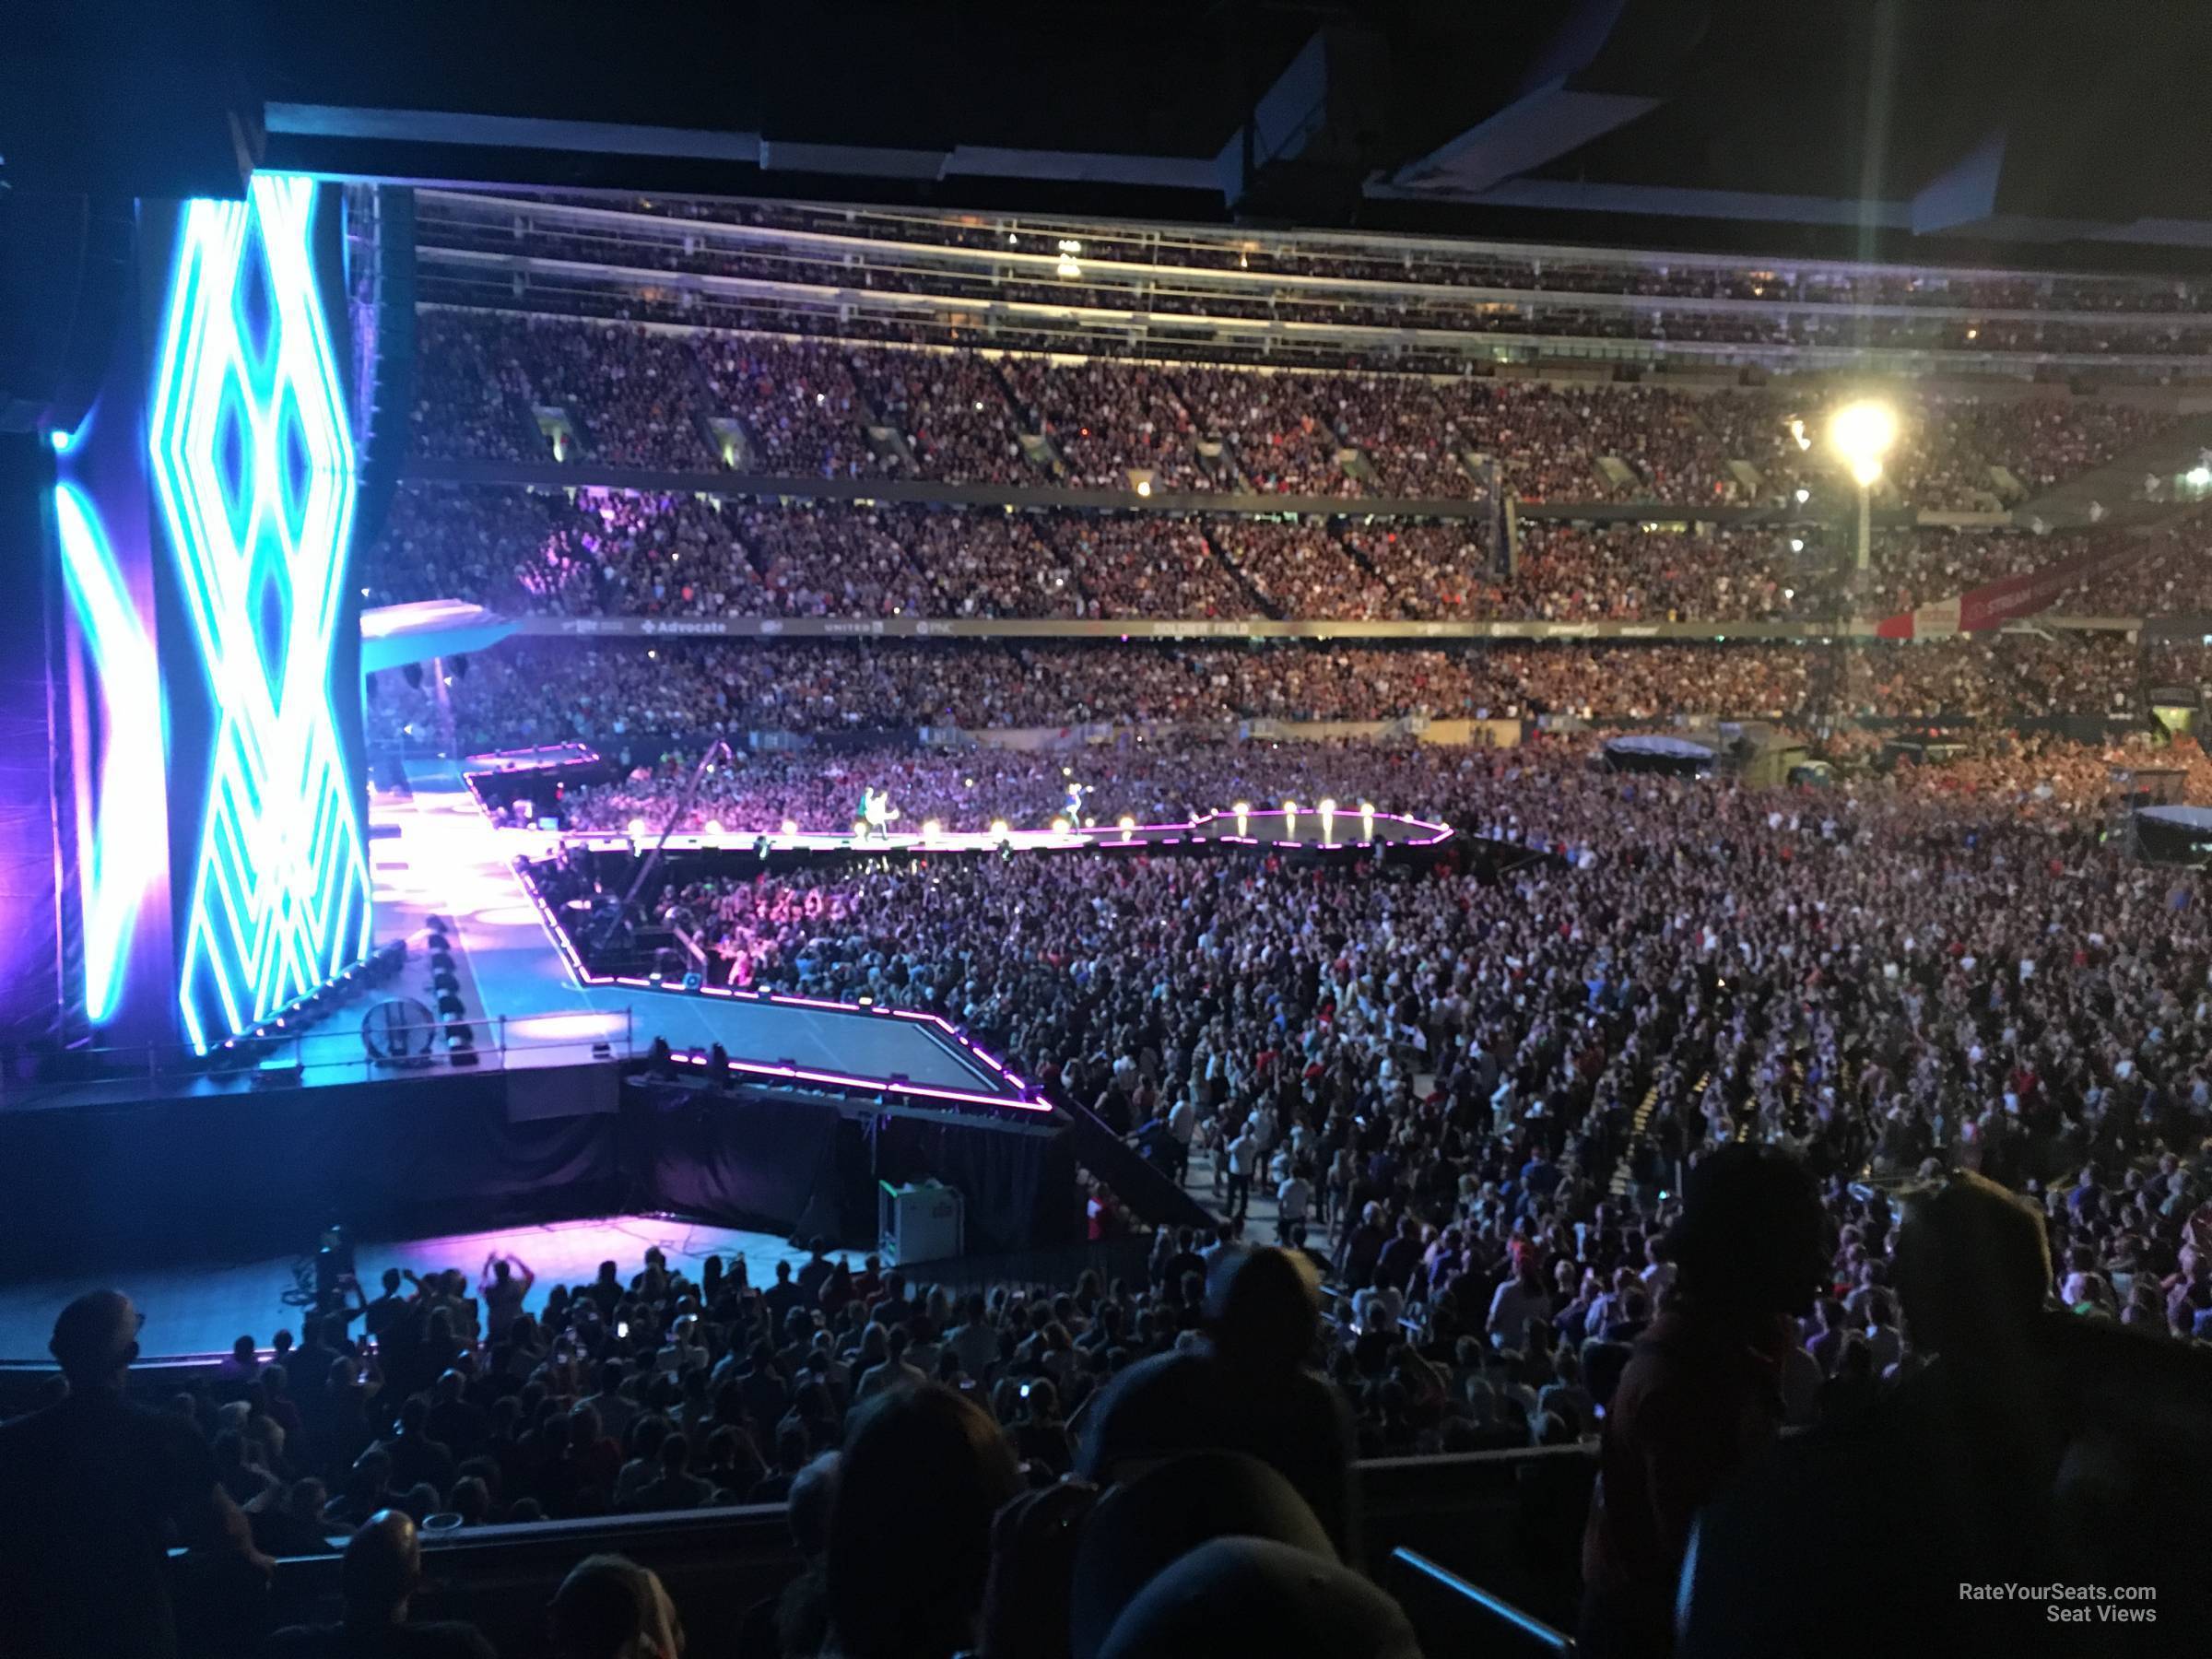 section 243, row 4 seat view  for concert - soldier field